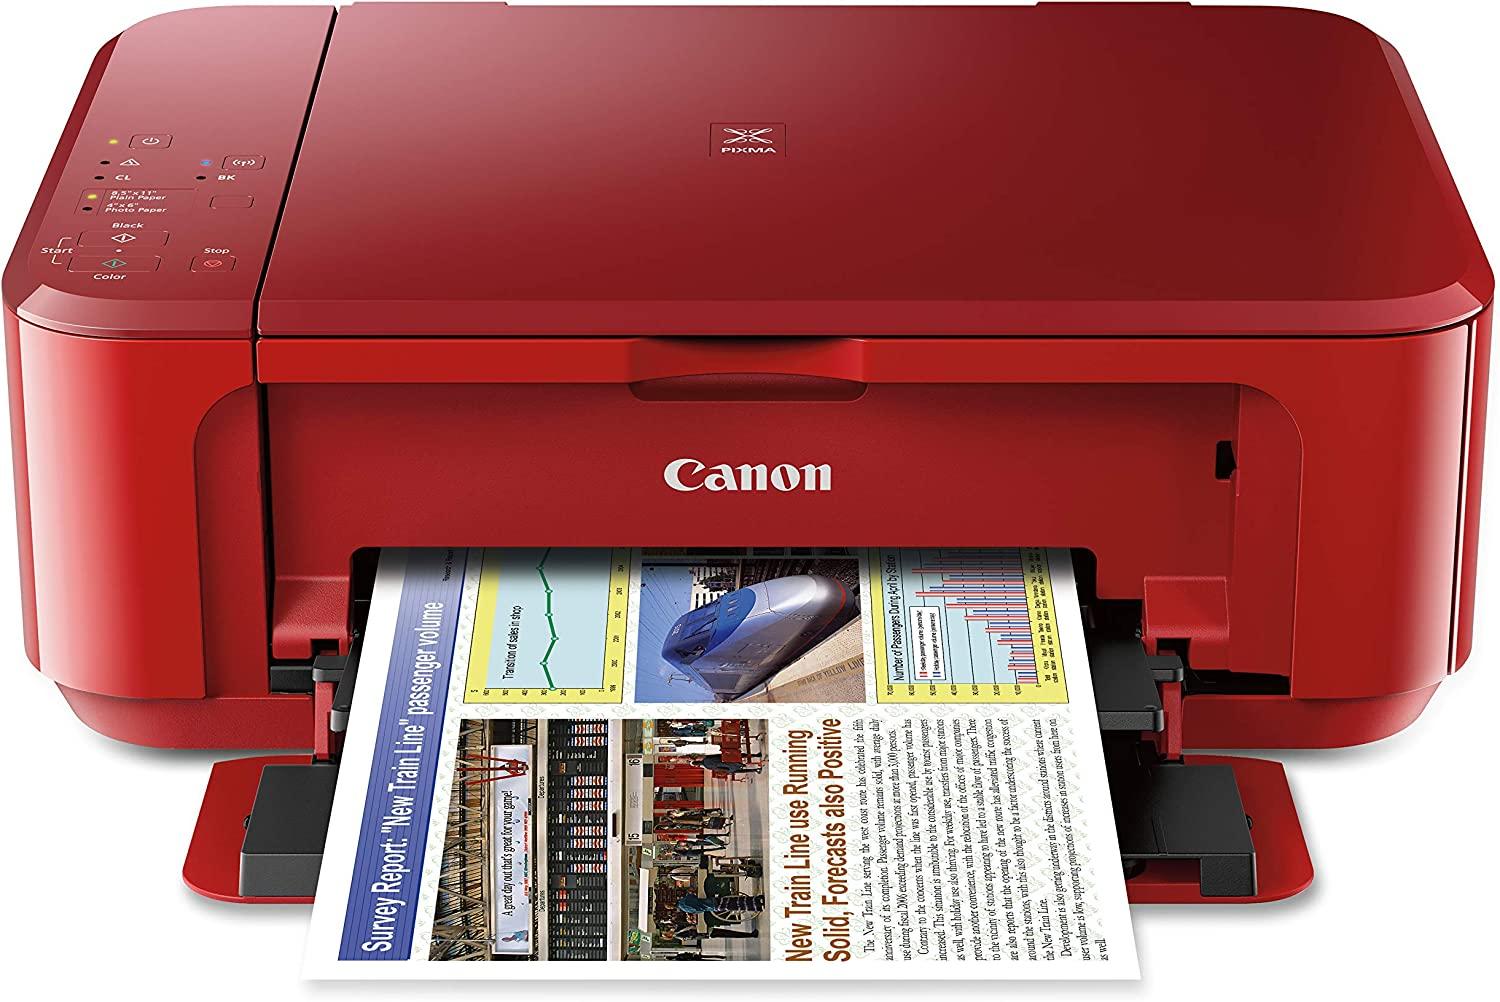 Canon Pixma MG3620 All-In-One Printer for $59.99 Shipped